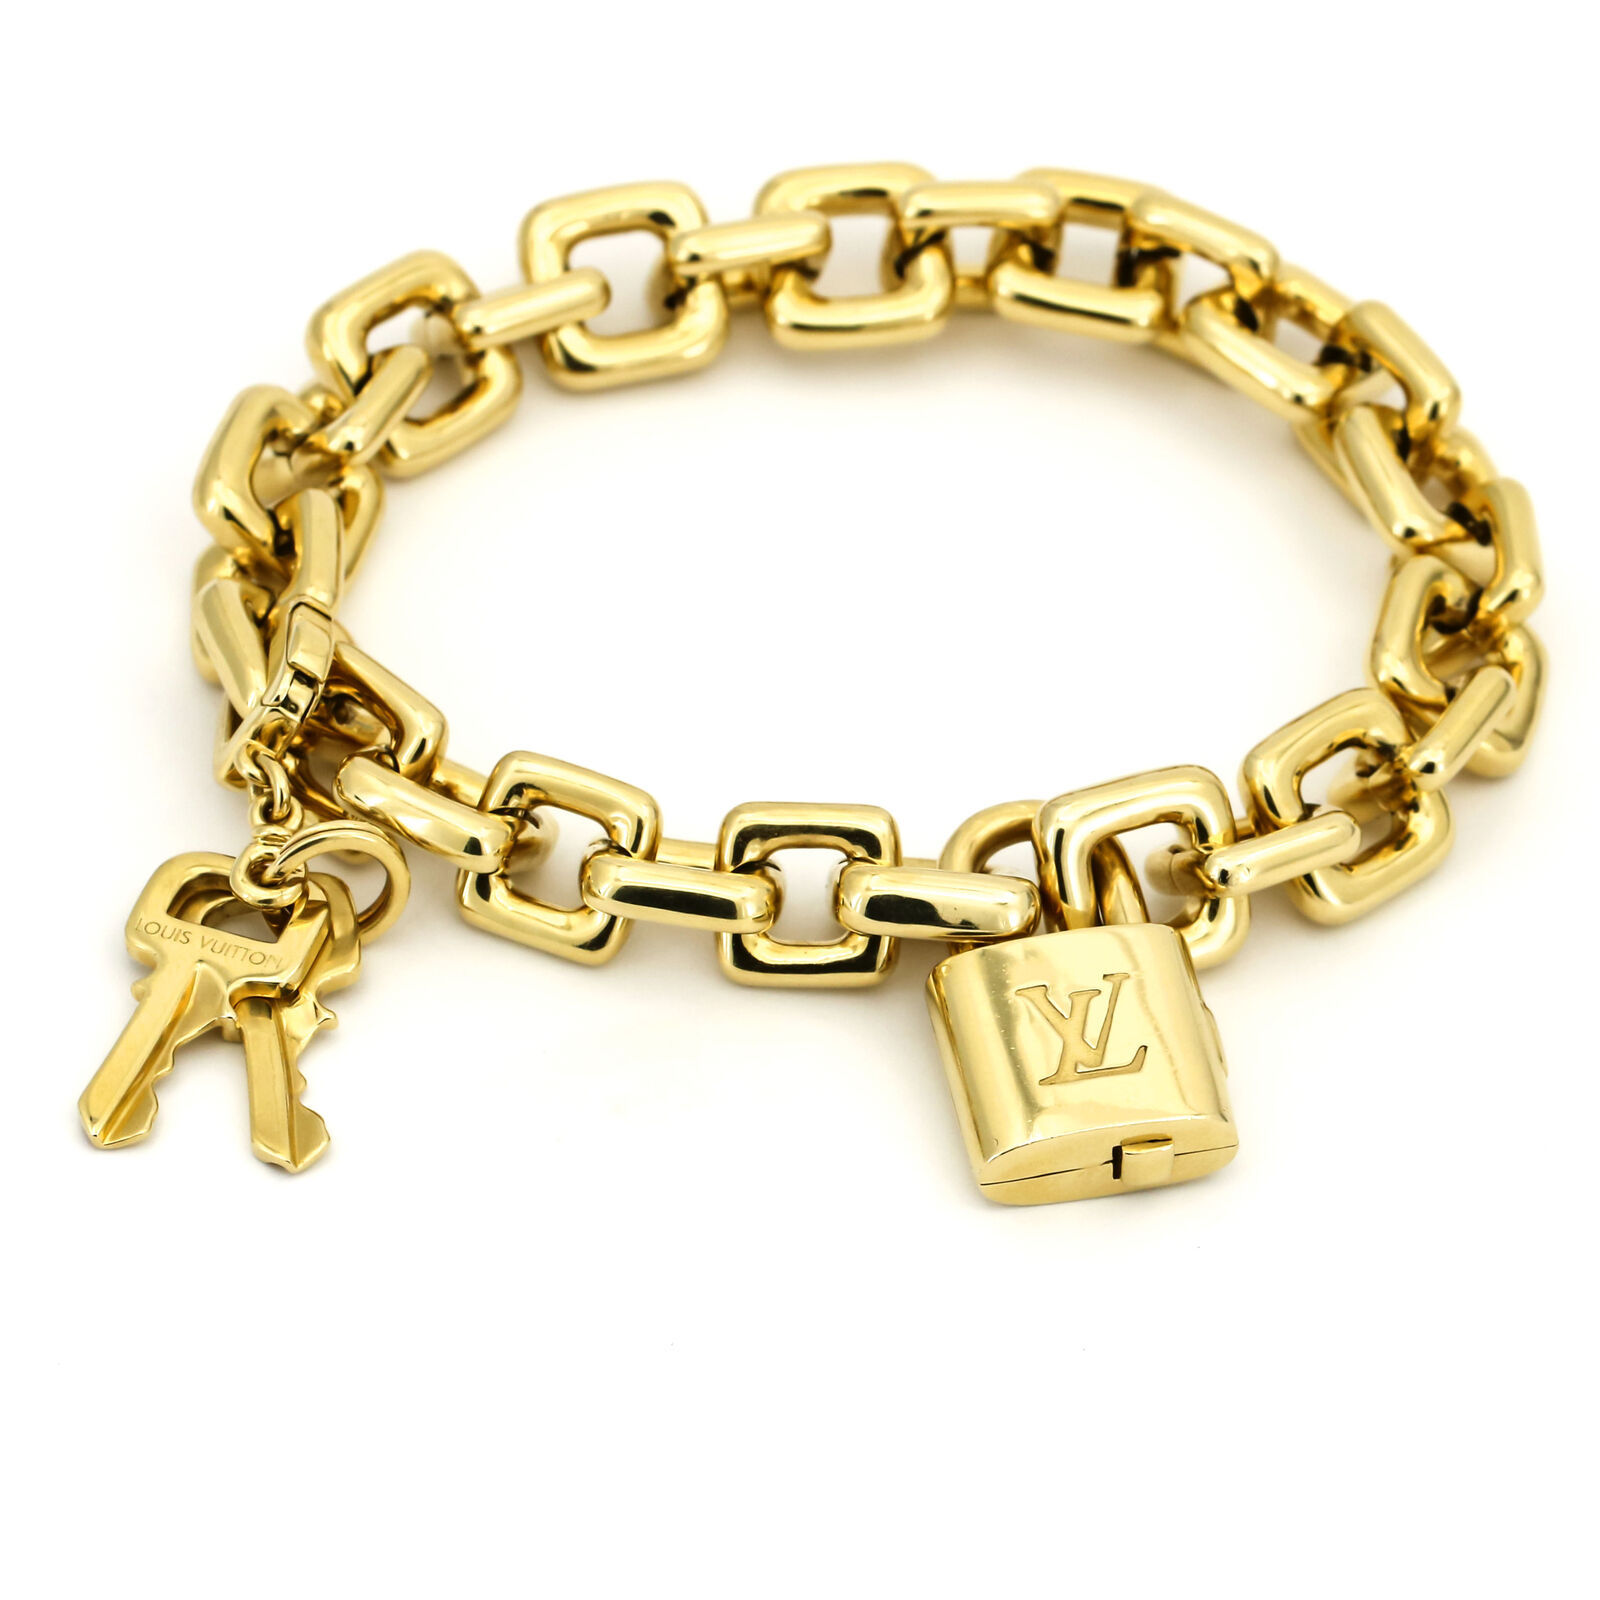 Louis Vuitton Padlock and Keys Charm Bracelet in 18k Yellow Gold with ...